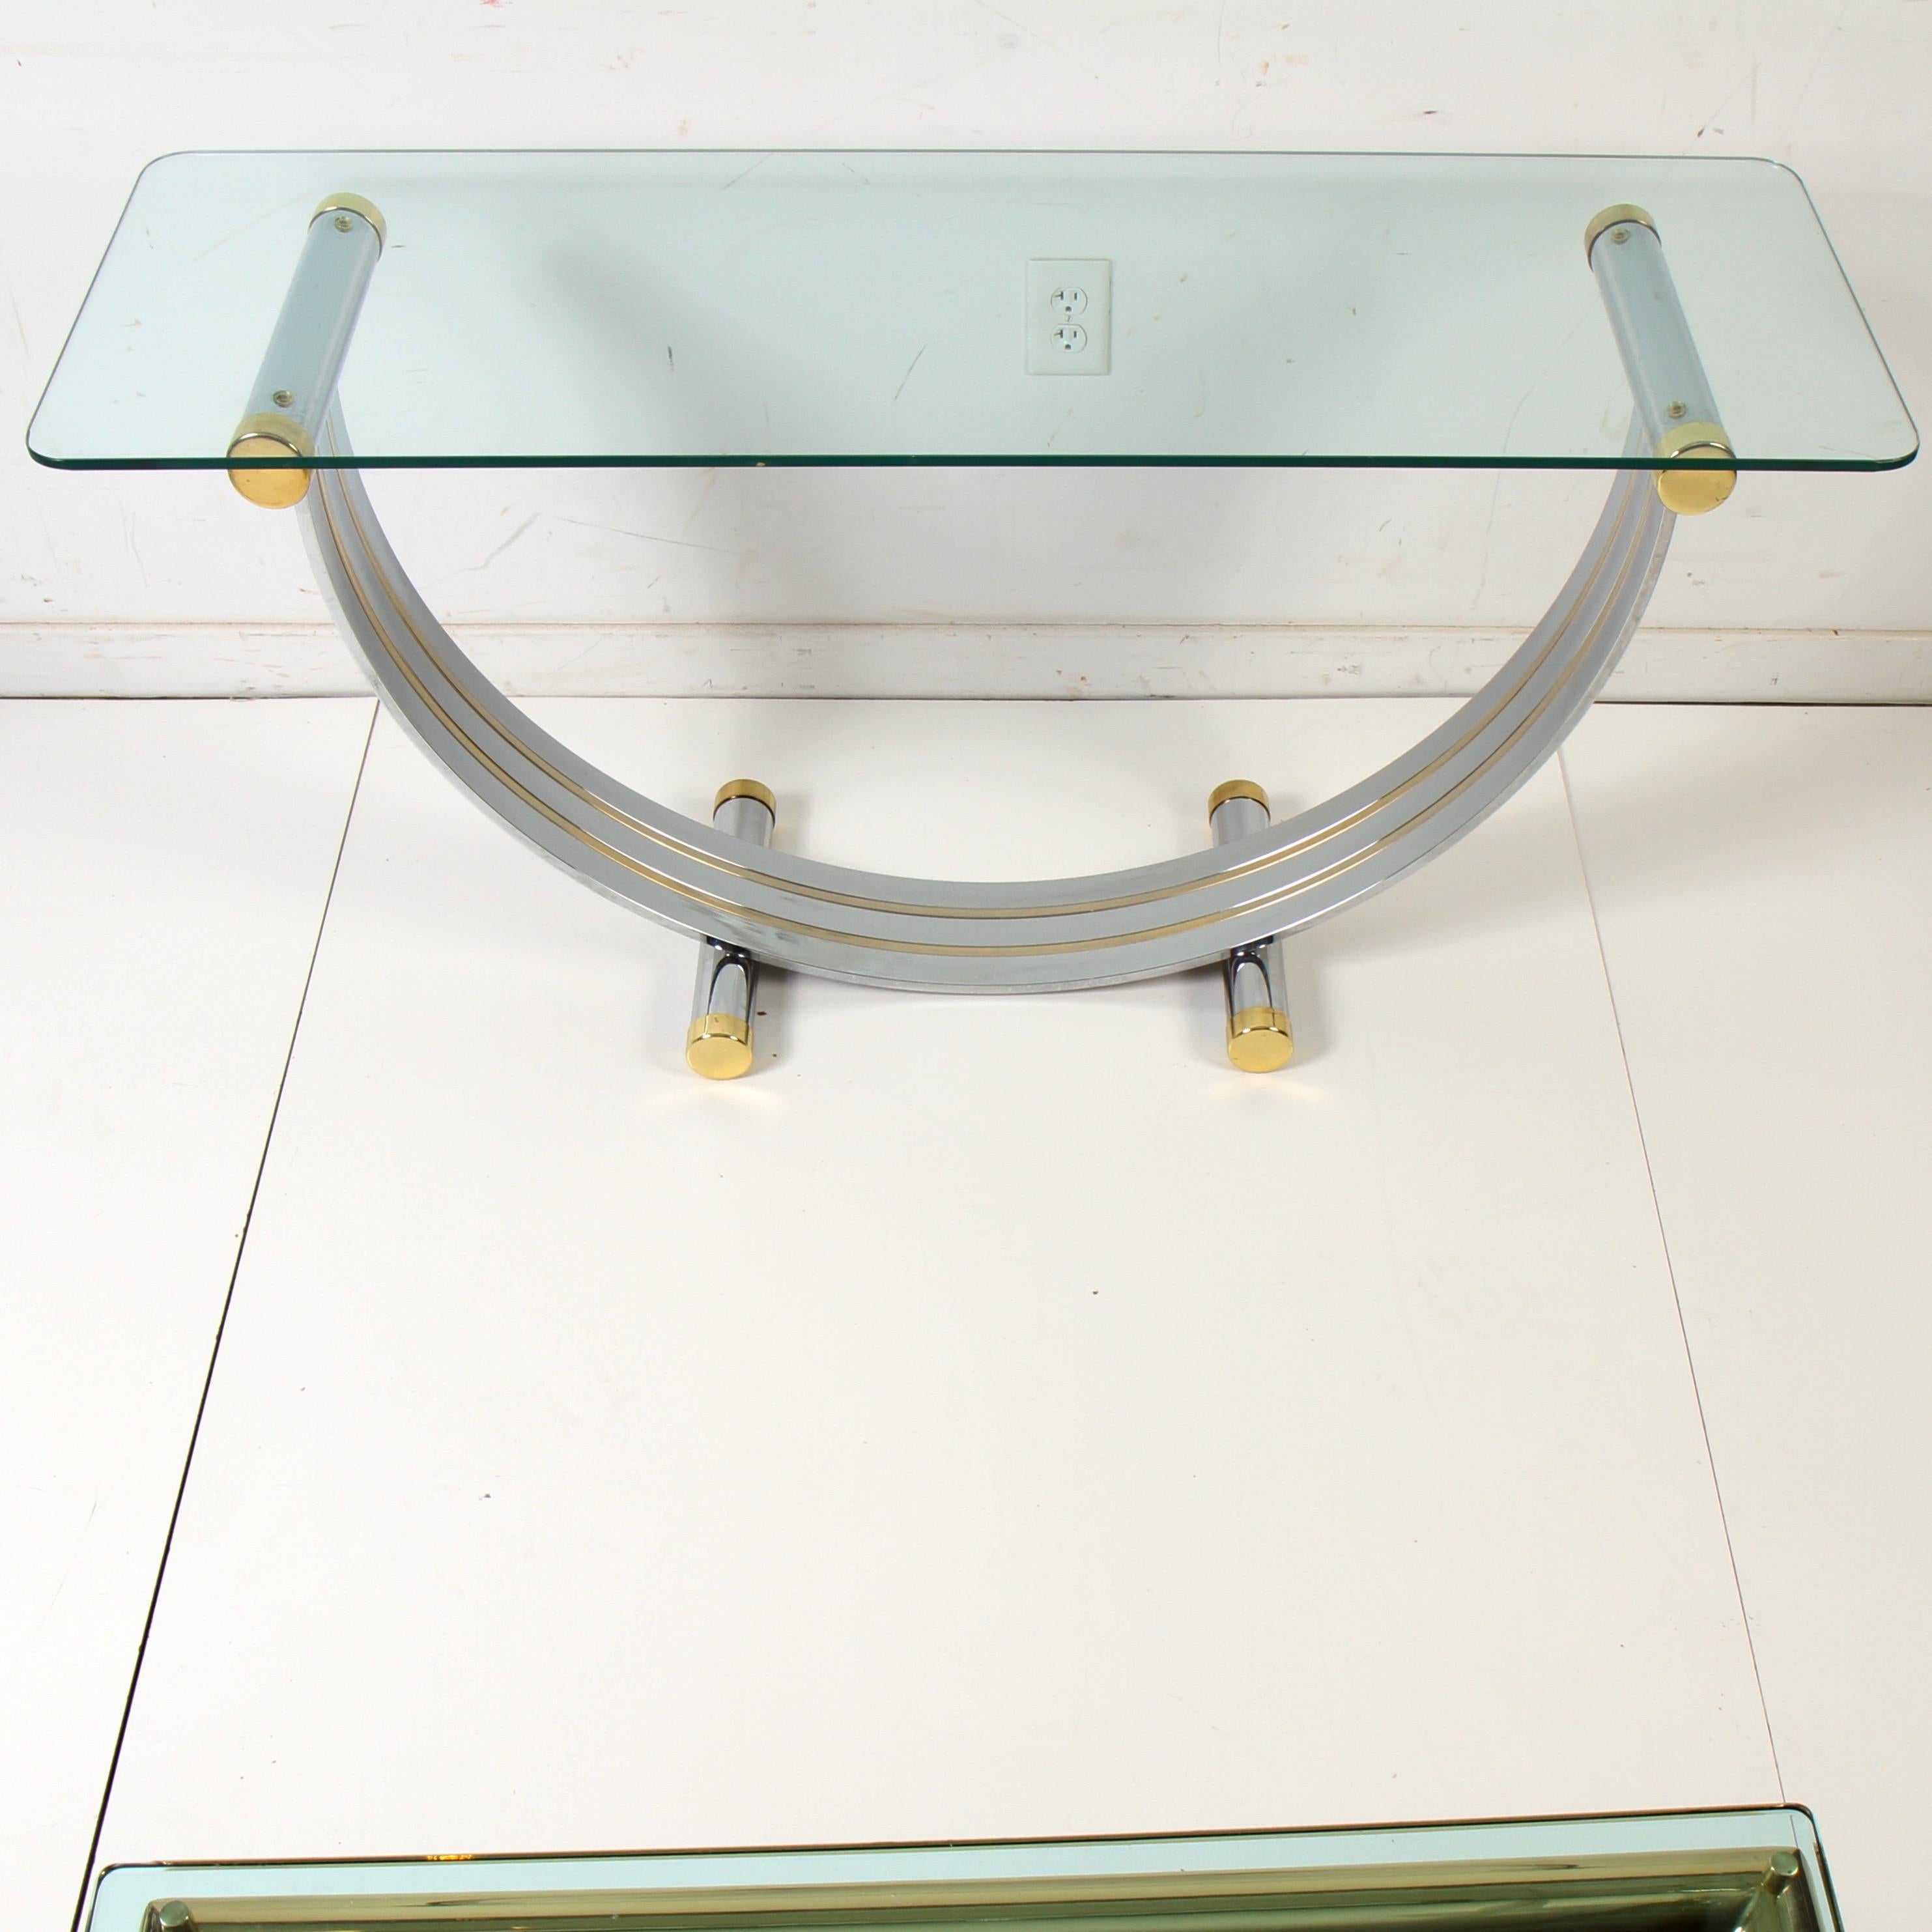 Chrome and glass console table with brass inserts and end caps by Italian designer Romeo Rega. In very clean condition with no pitttinr signs of wear to either the chrome or brass. Glass is pristine also.

Rega was born in 1904 and is best known